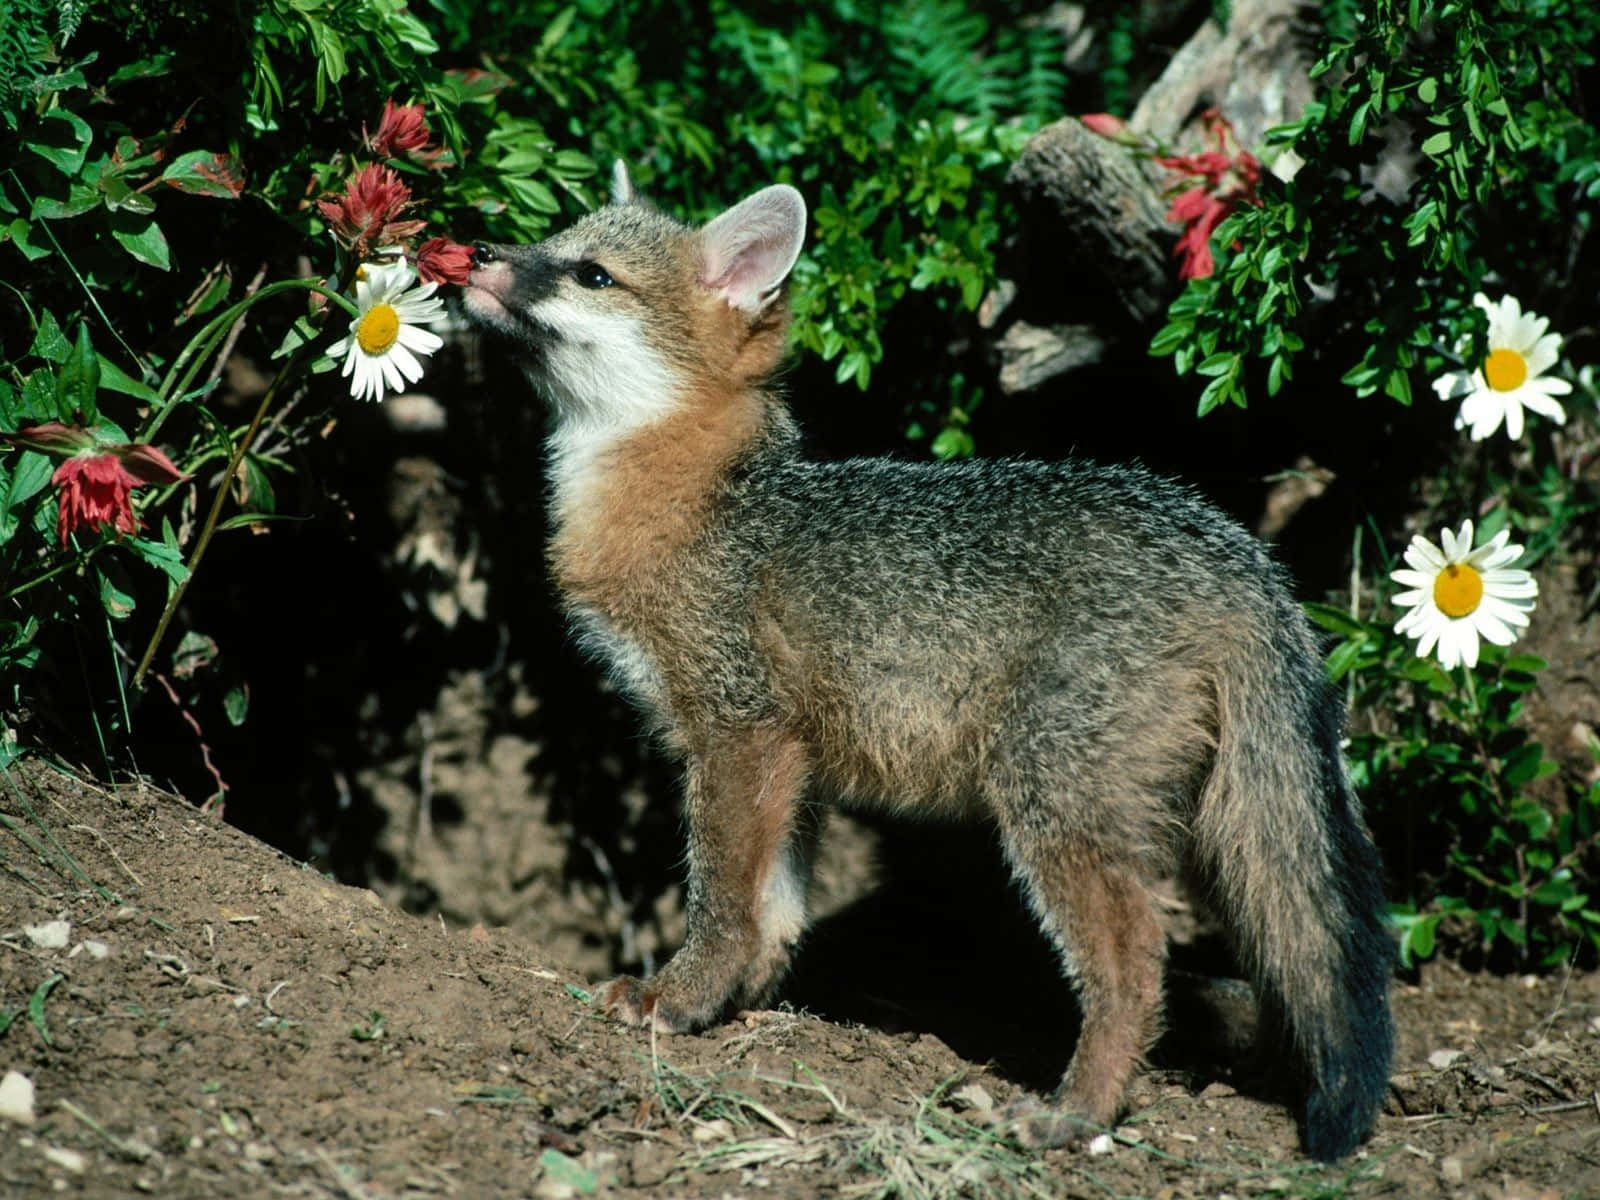 A Fox Is Sniffing Flowers In The Dirt